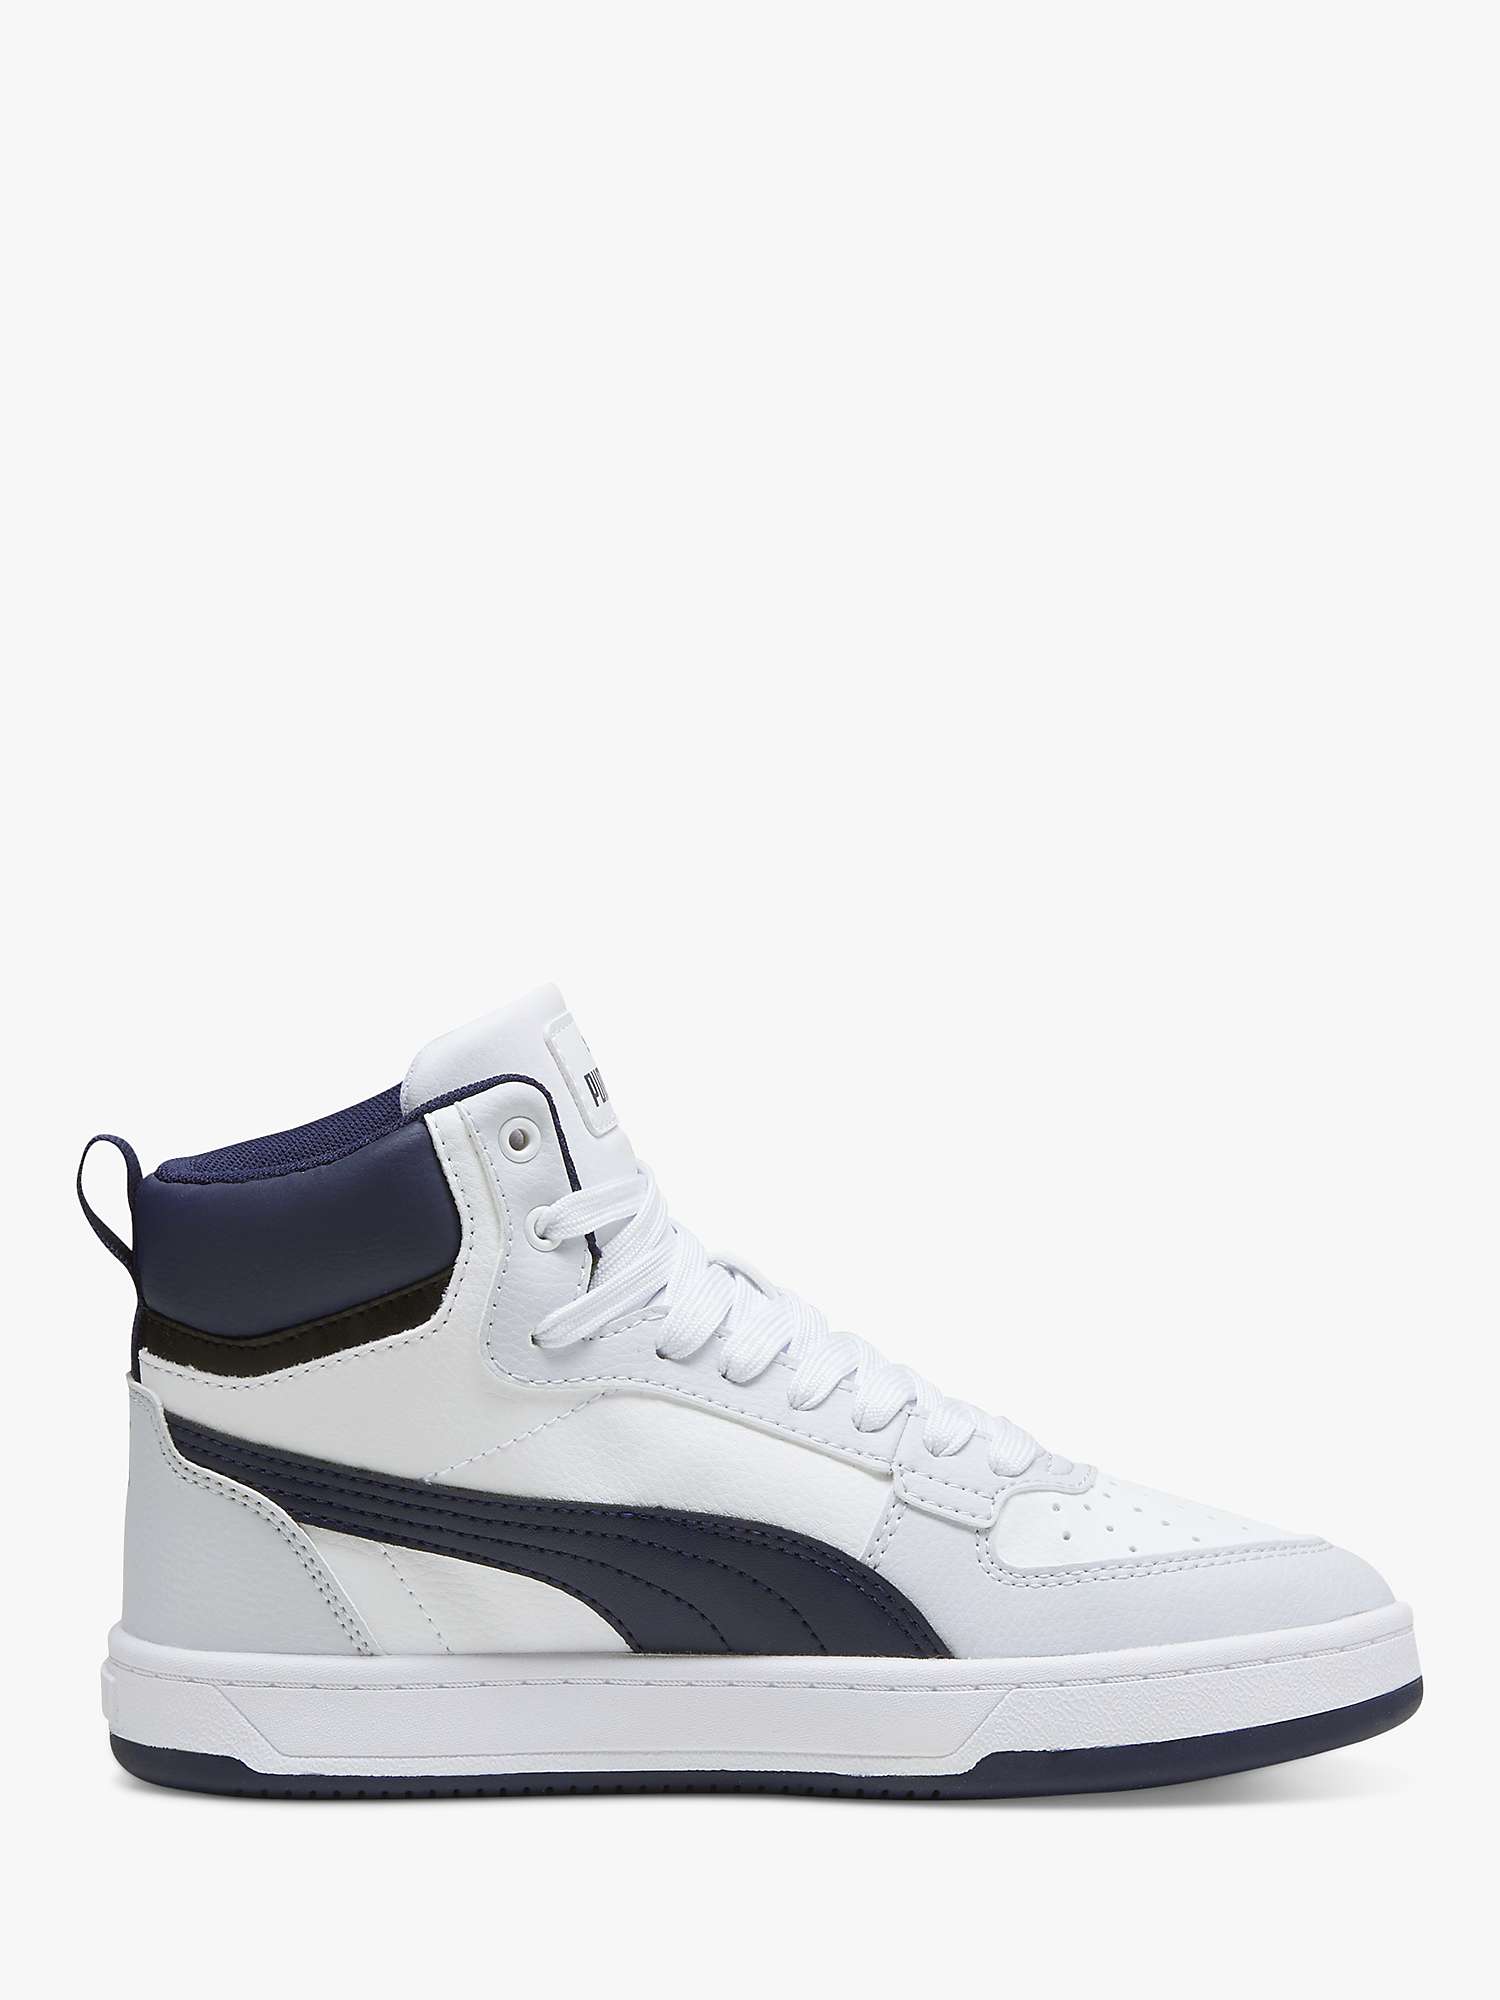 Buy PUMA Kids' Caven 2.0 Mid Trainers, White/Navy Online at johnlewis.com